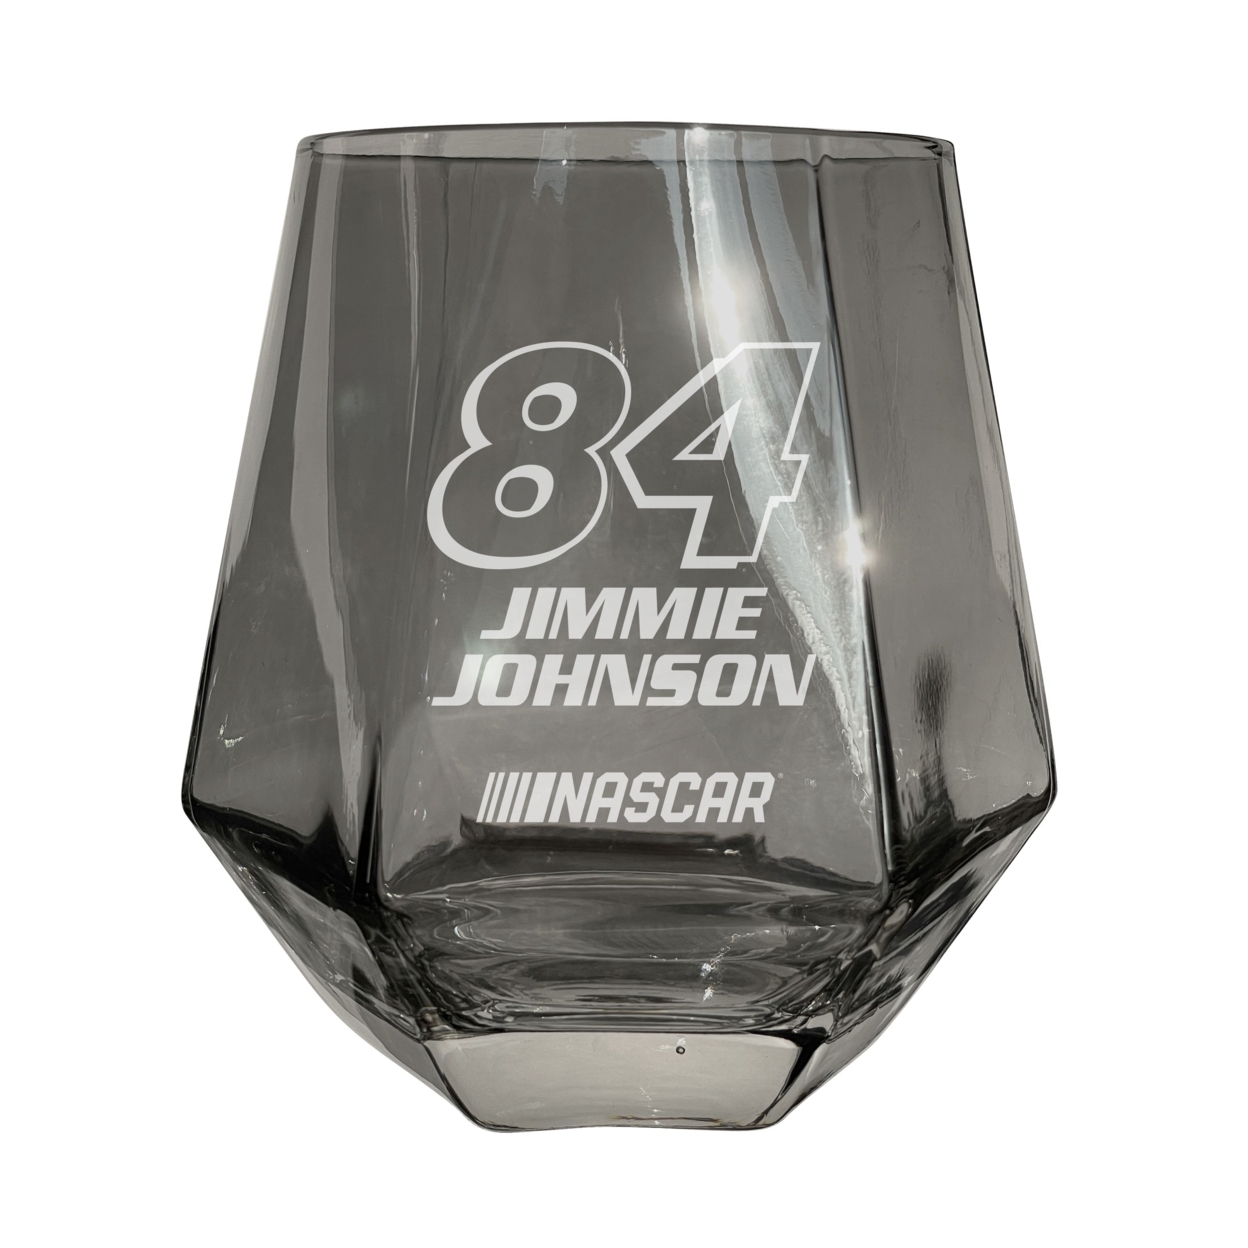 #84 Jimmie Johnson Officially Licensed 10 Oz Engraved Diamond Wine Glass - Grey, 2-Pack